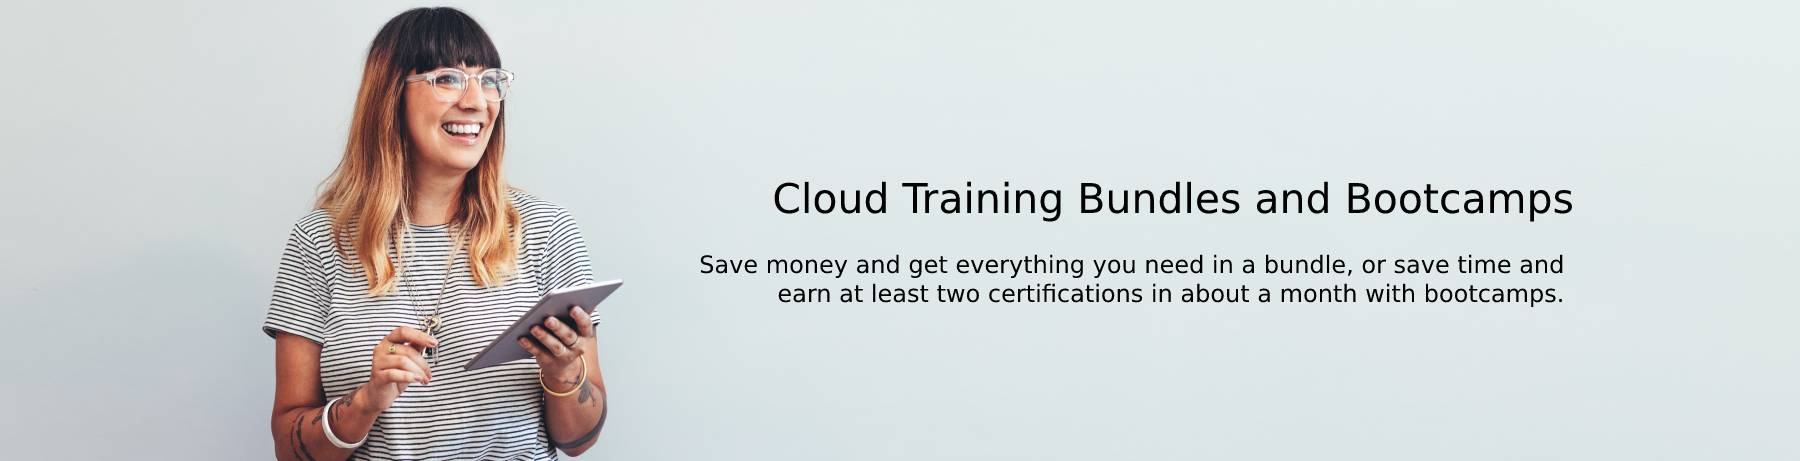 Bundles and Bootcamps